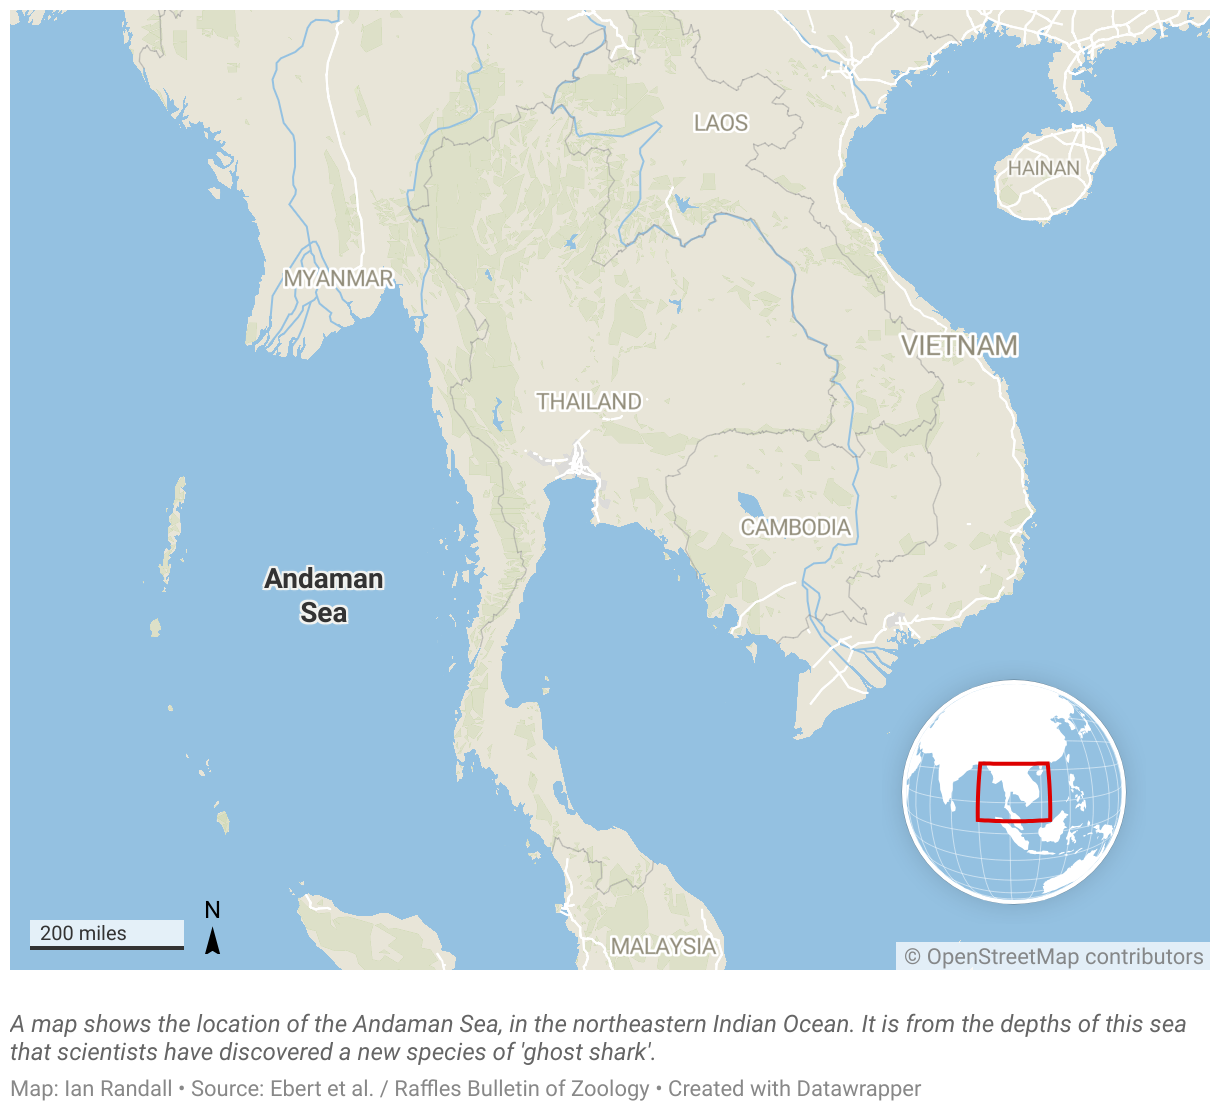 A map shows the location of the Andaman Sea, in the northeastern Indian Ocean.